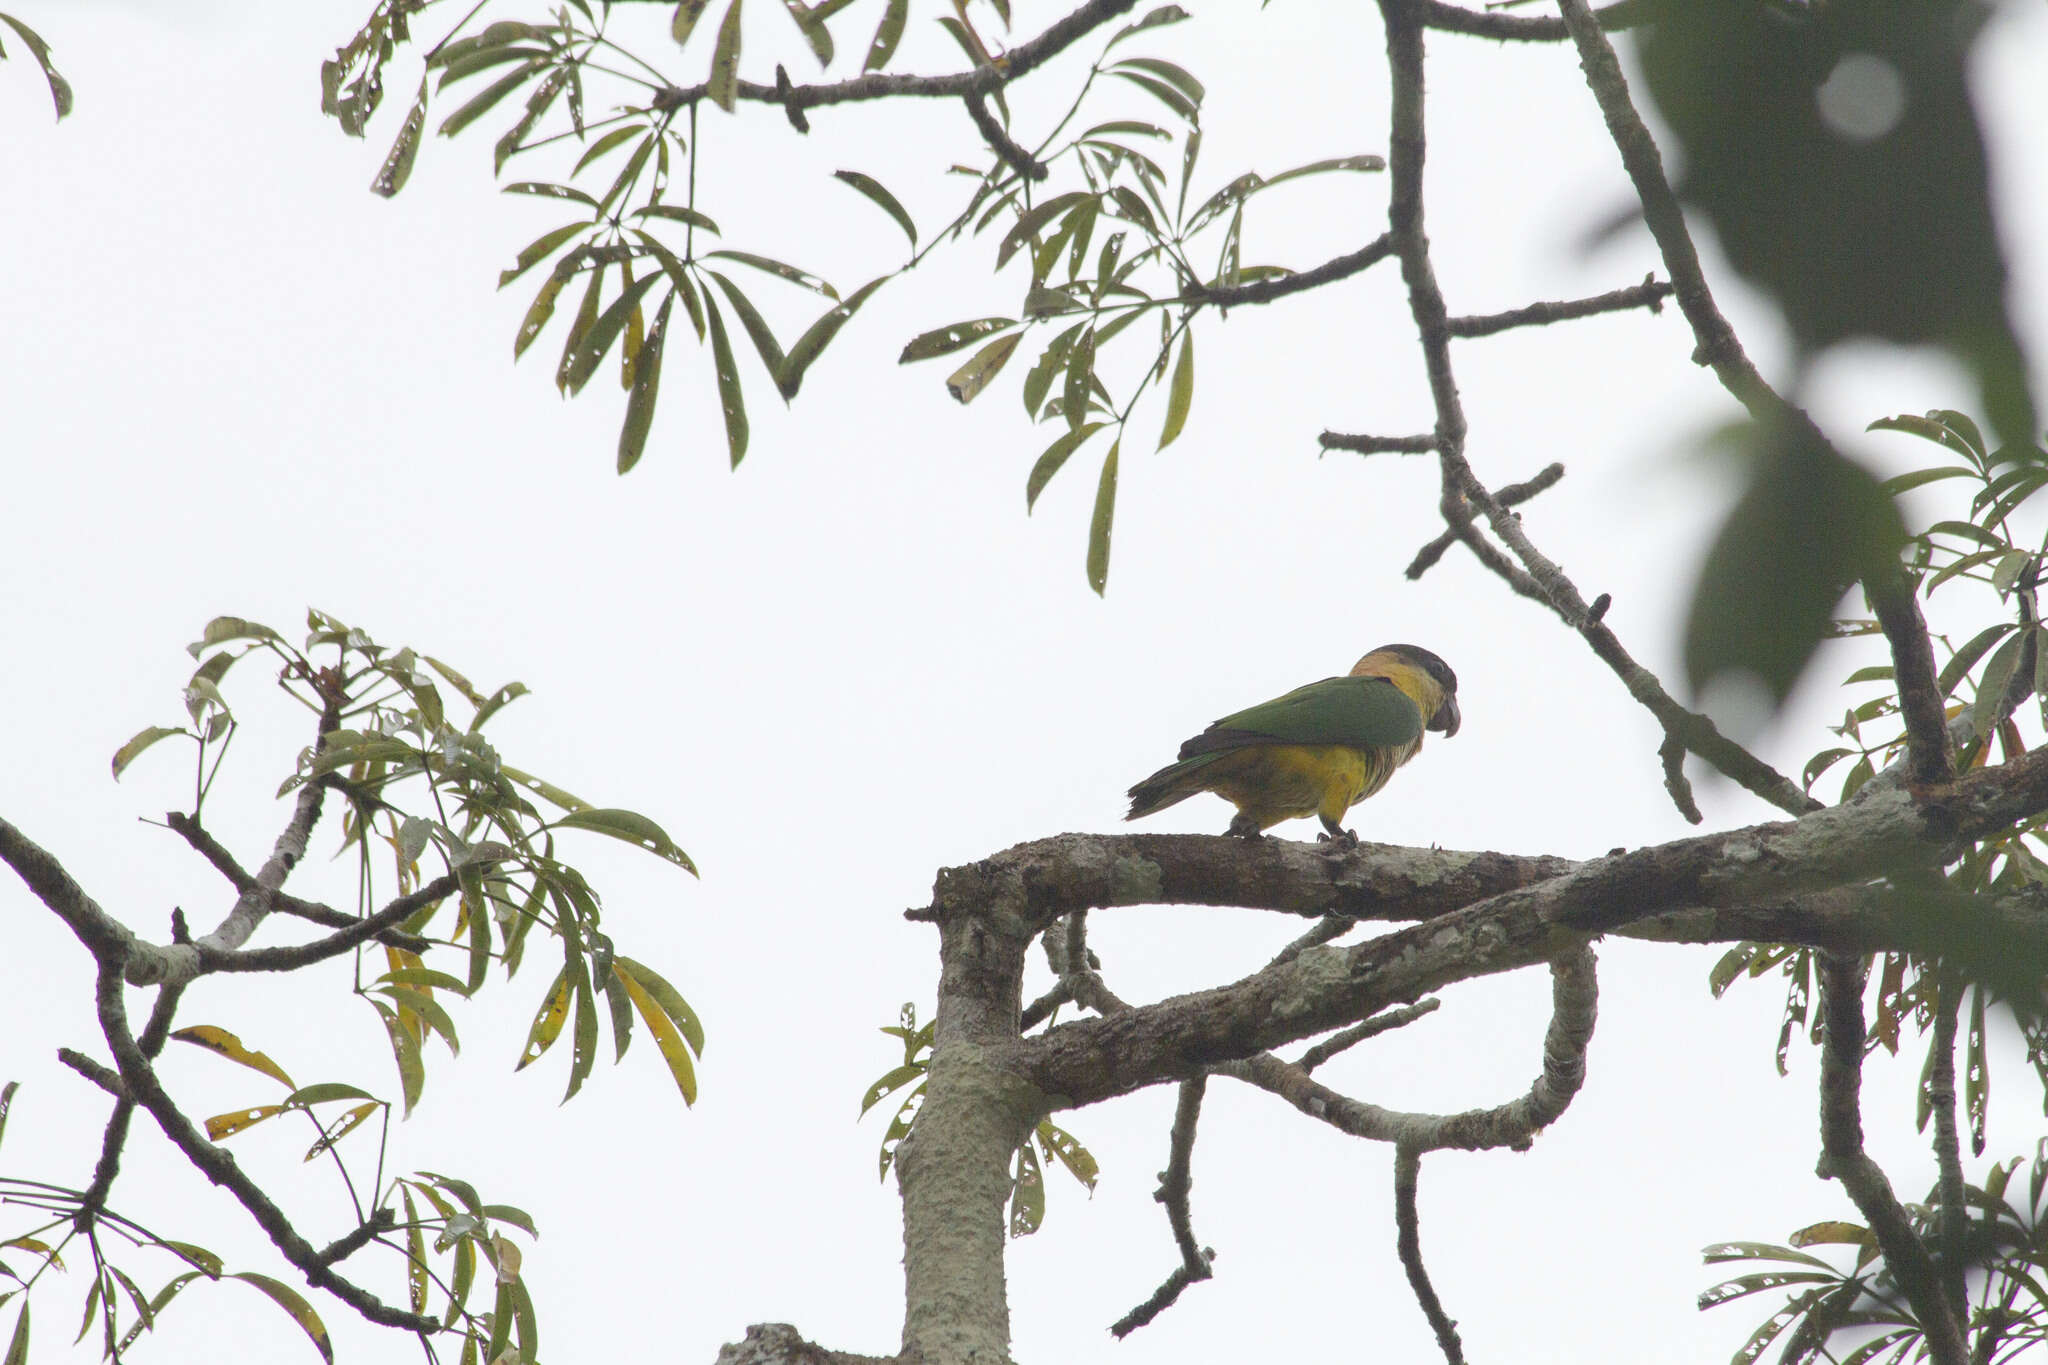 Image of Black-headed Parrot